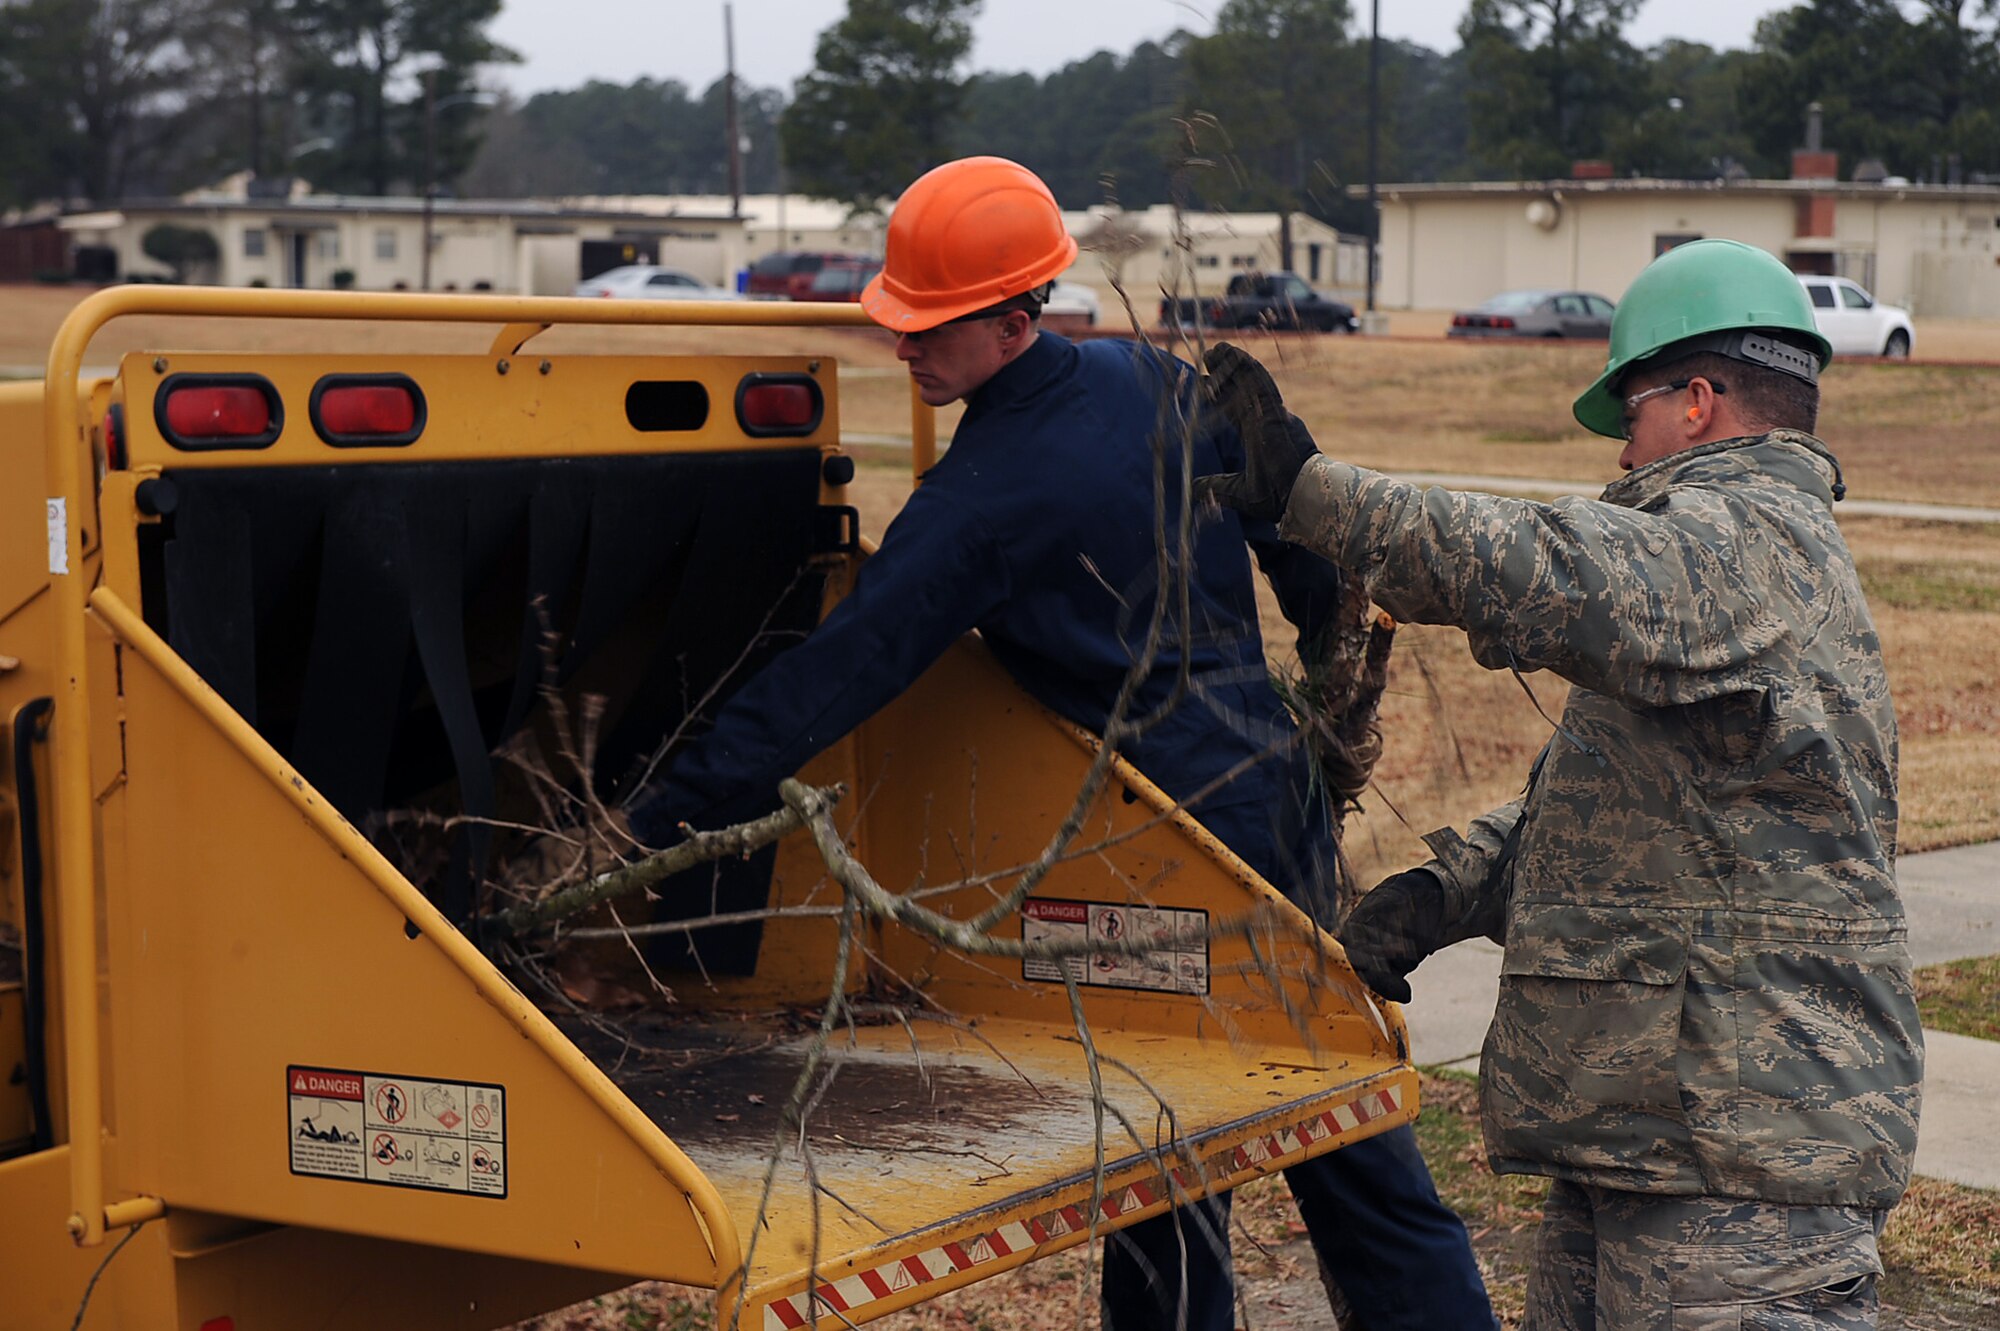 Tech Sgt. Robert Echols (right), 567th RED HORSE Squadron heavy equipment operator, and Staff Sgt. Daniel Steenstra, 201st RED HORSE Squadron Detachment 1 heavy equipment operator, push tree limbs into a wood chipper on Seymour Johnson Air Force, Base, N.C., Feb. 24, 2010. After bad weather damages trees or when tree branches begin to grow to close to buildings, work orders are put in for them to be cut down. Echols hails from Ludlow, Mass. and Steenstra is from Shippensburg, Pa. (U.S. Air Force photo/Senior Airman Ciara Wymbs) 